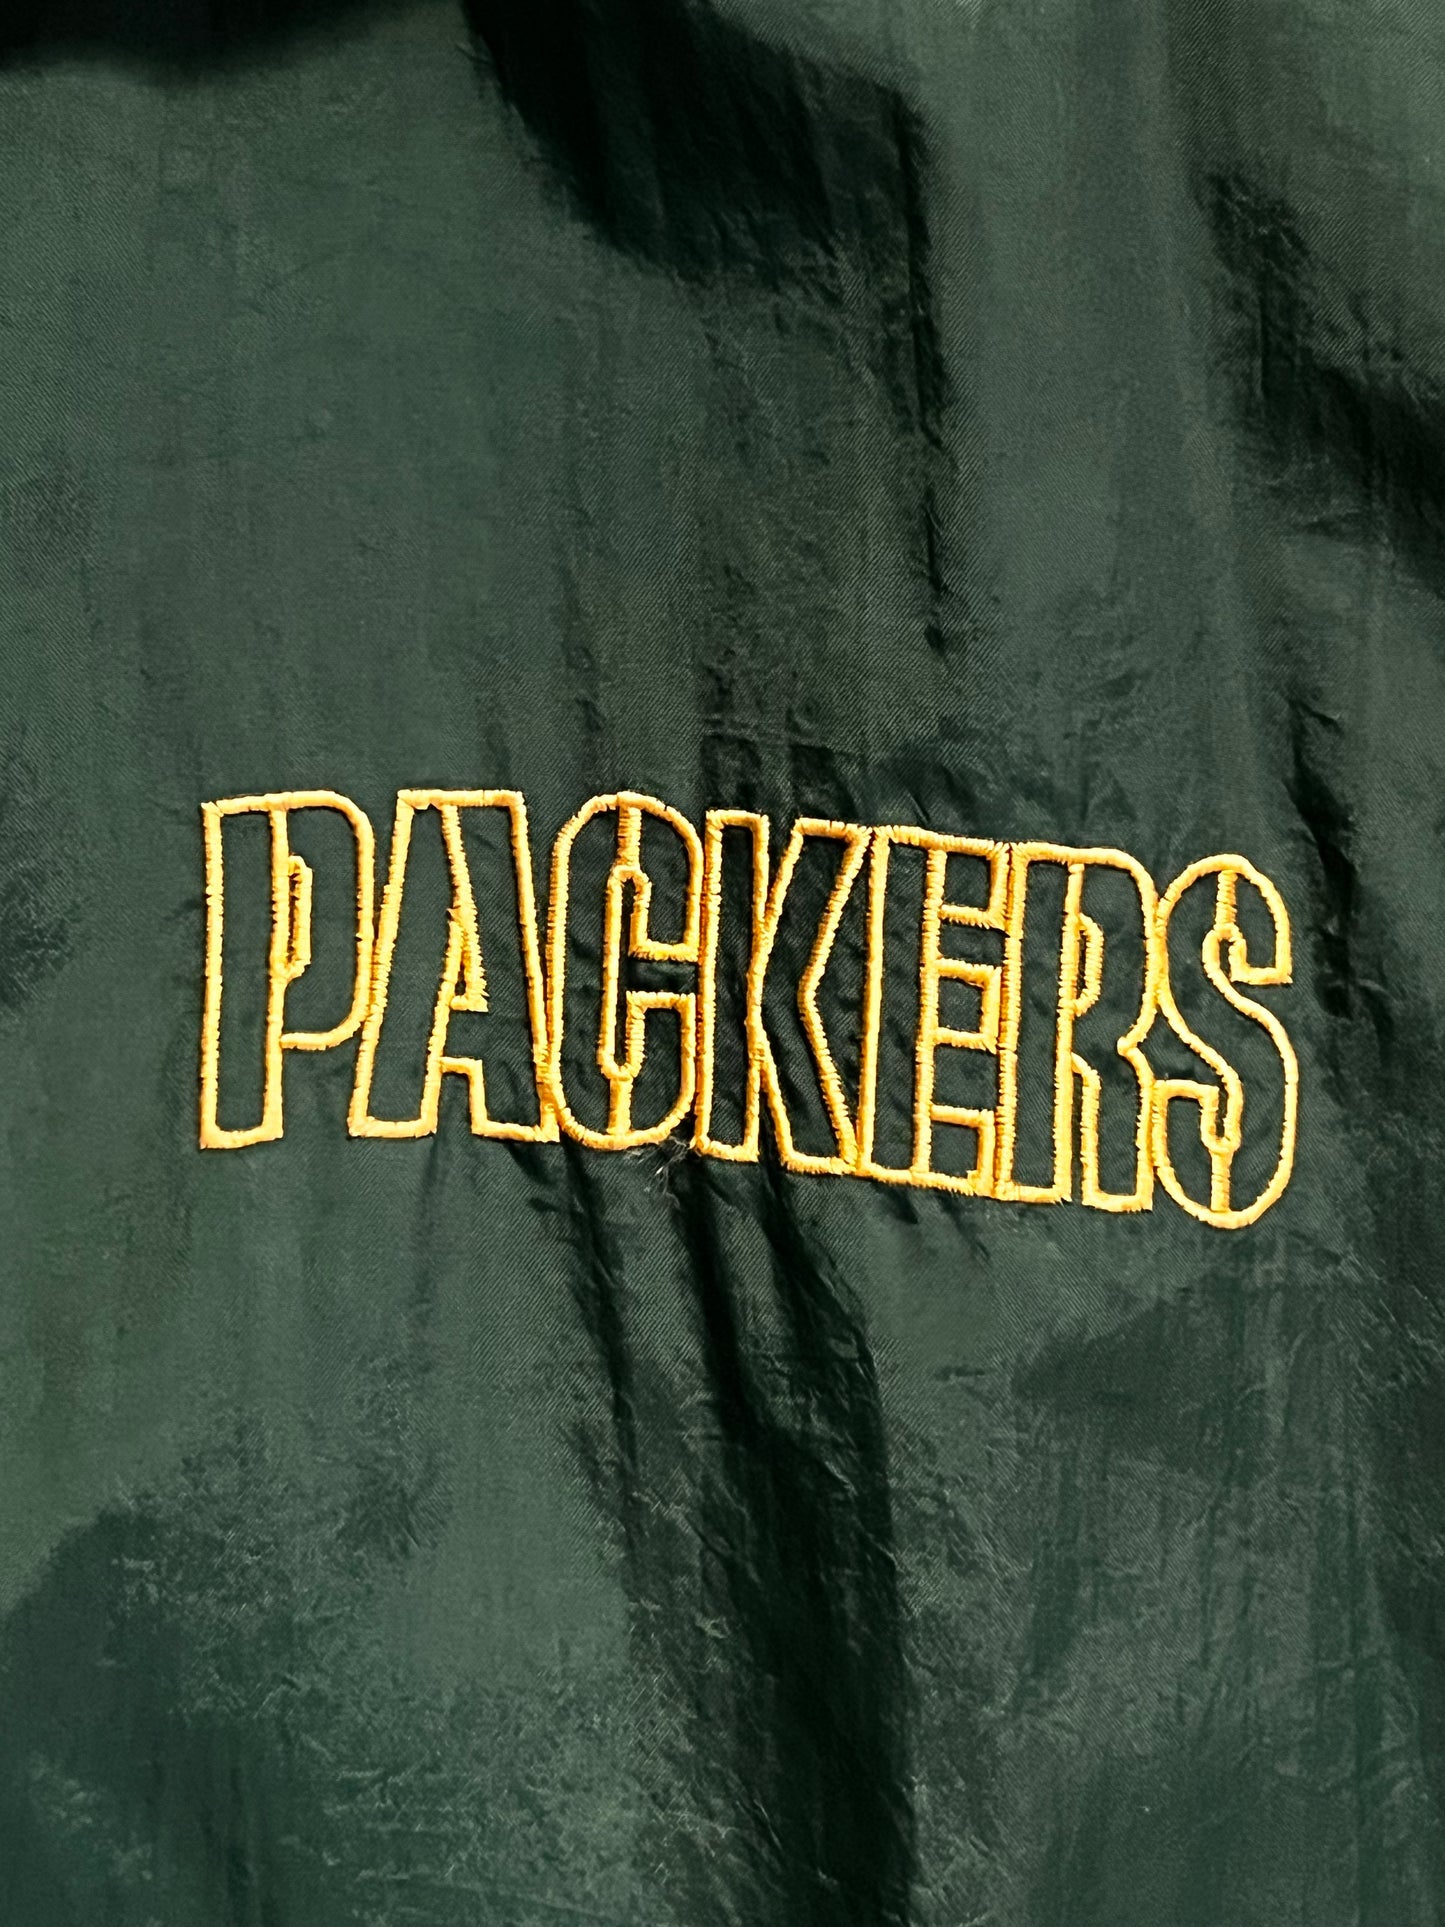 90s Green Bay Packers Jacket